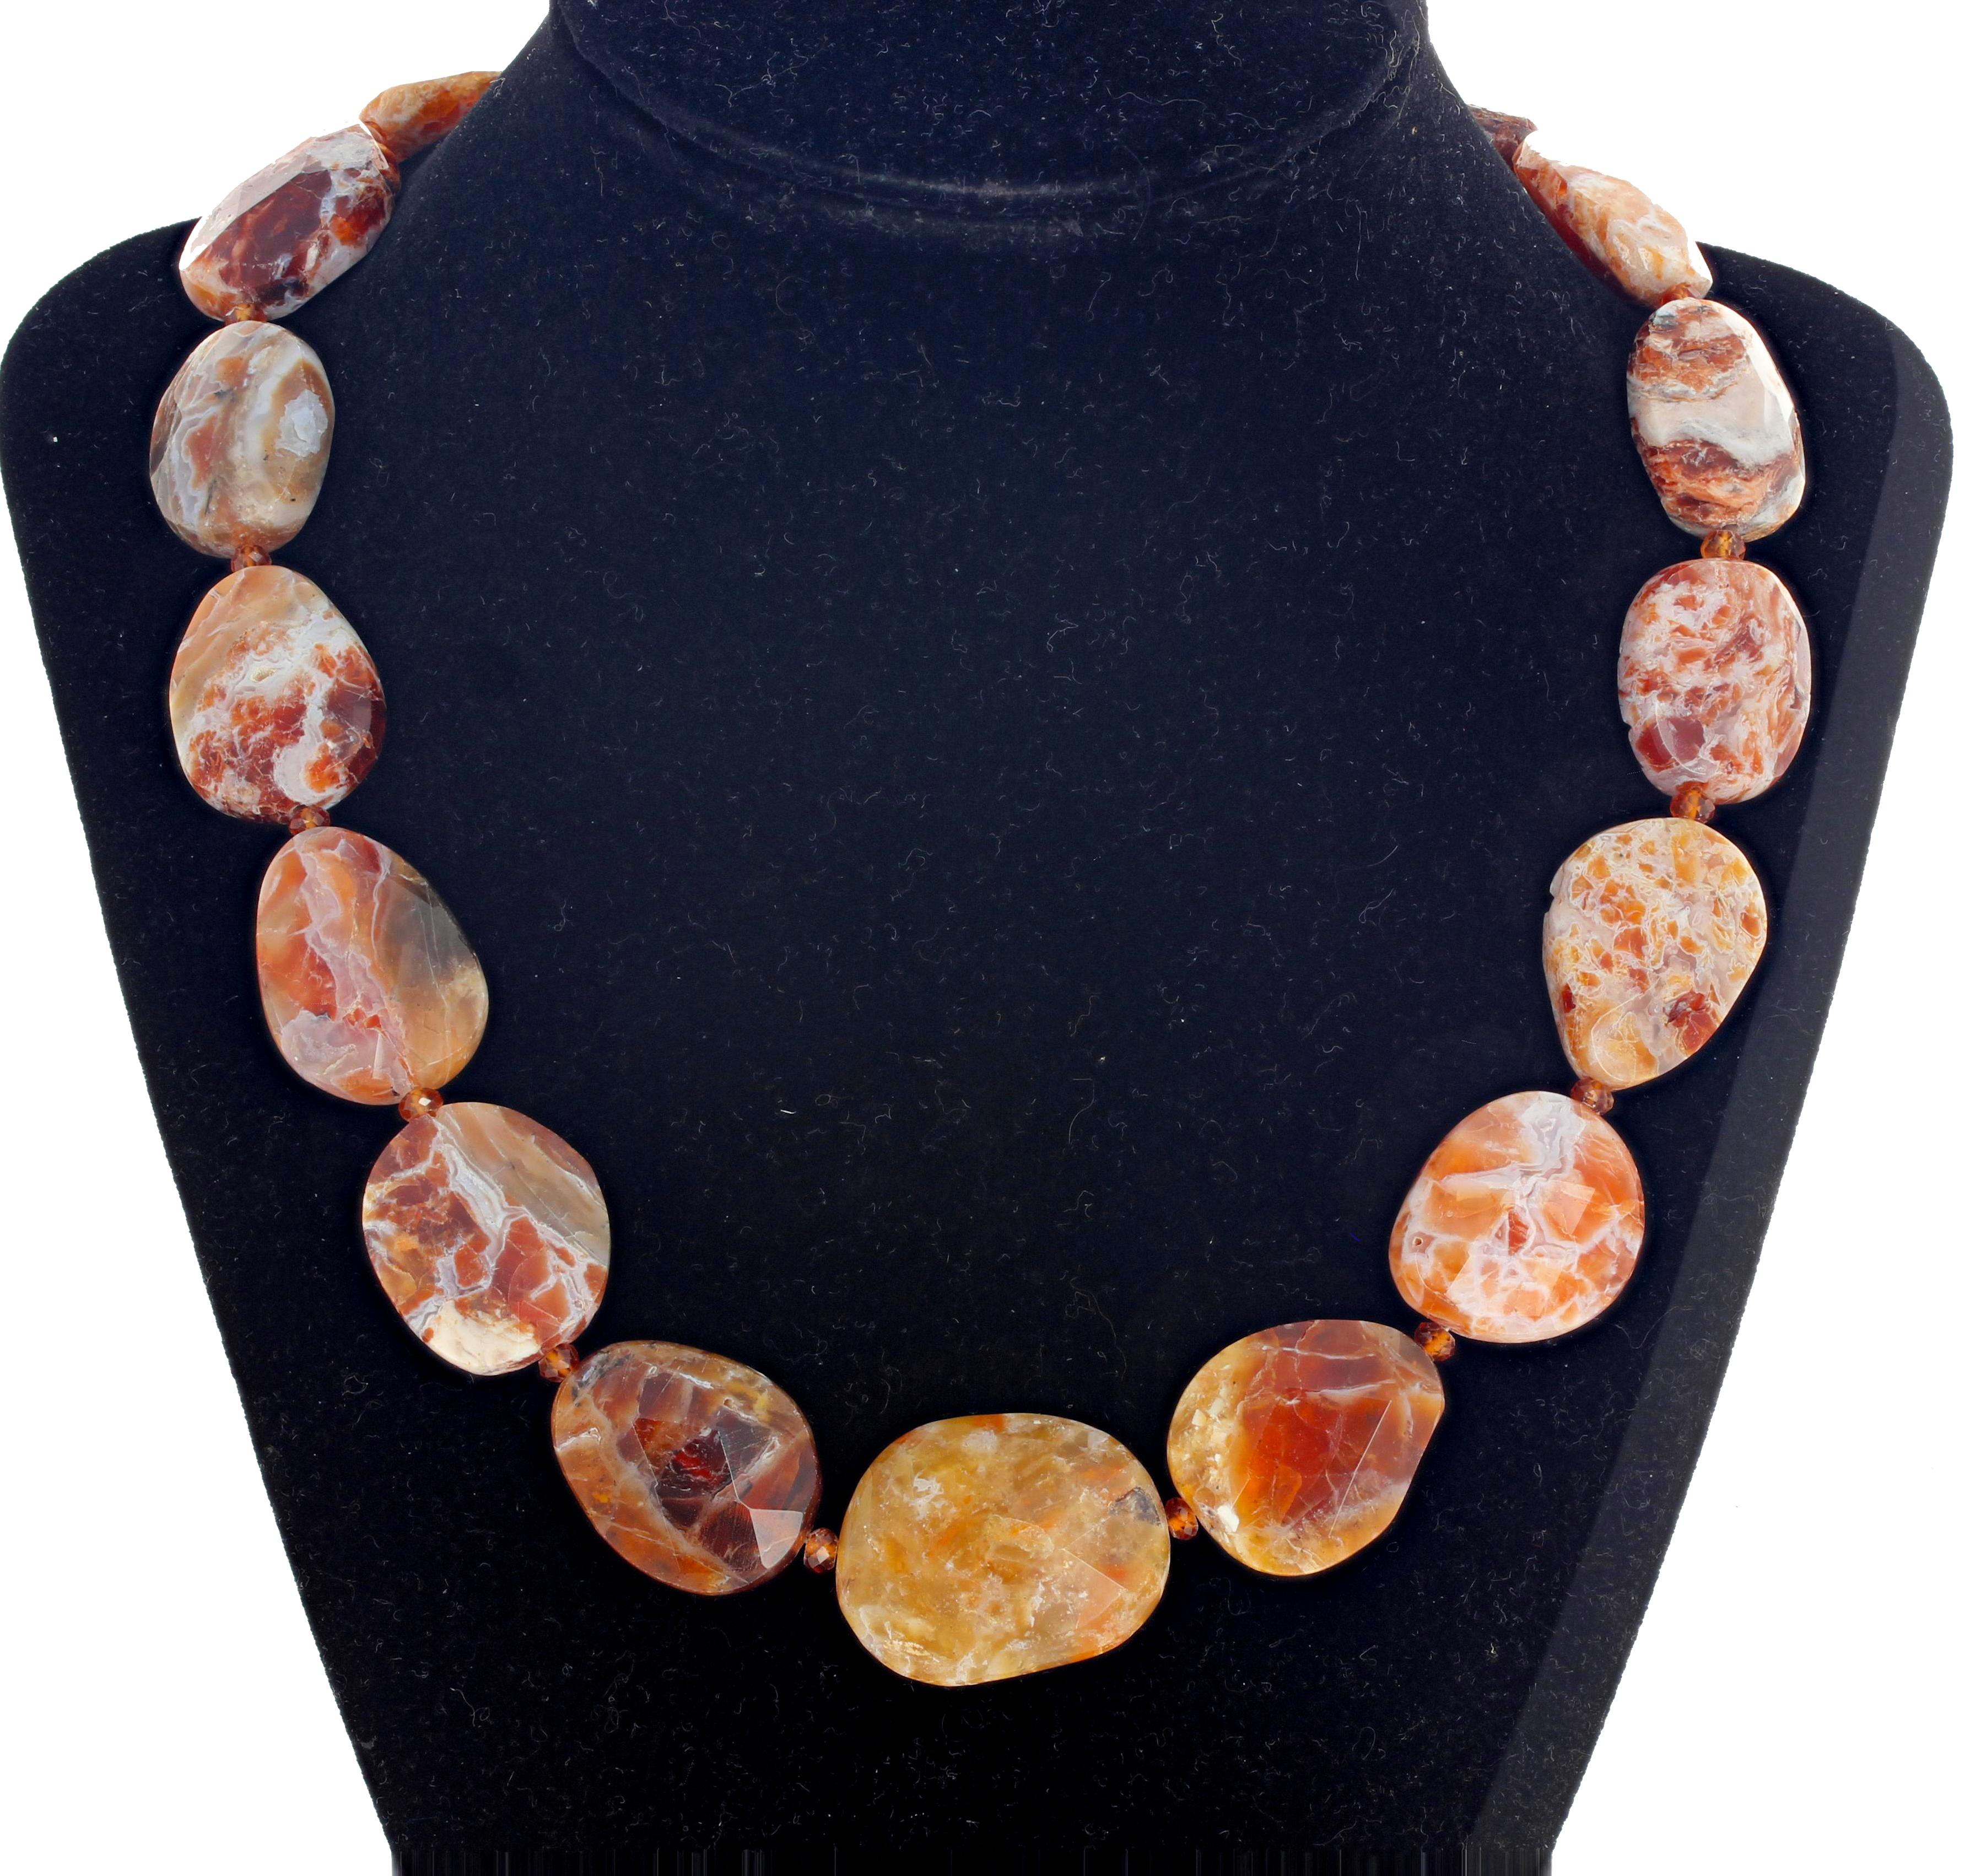 Multi color artistic rare natural Brandy Opal accented with gem cut glittering little Hessonite Garnets in this 18.5 inch long necklace with gold tone easy to use hook clasp. I wear one of these to dinner in the evenings and people come up and ask